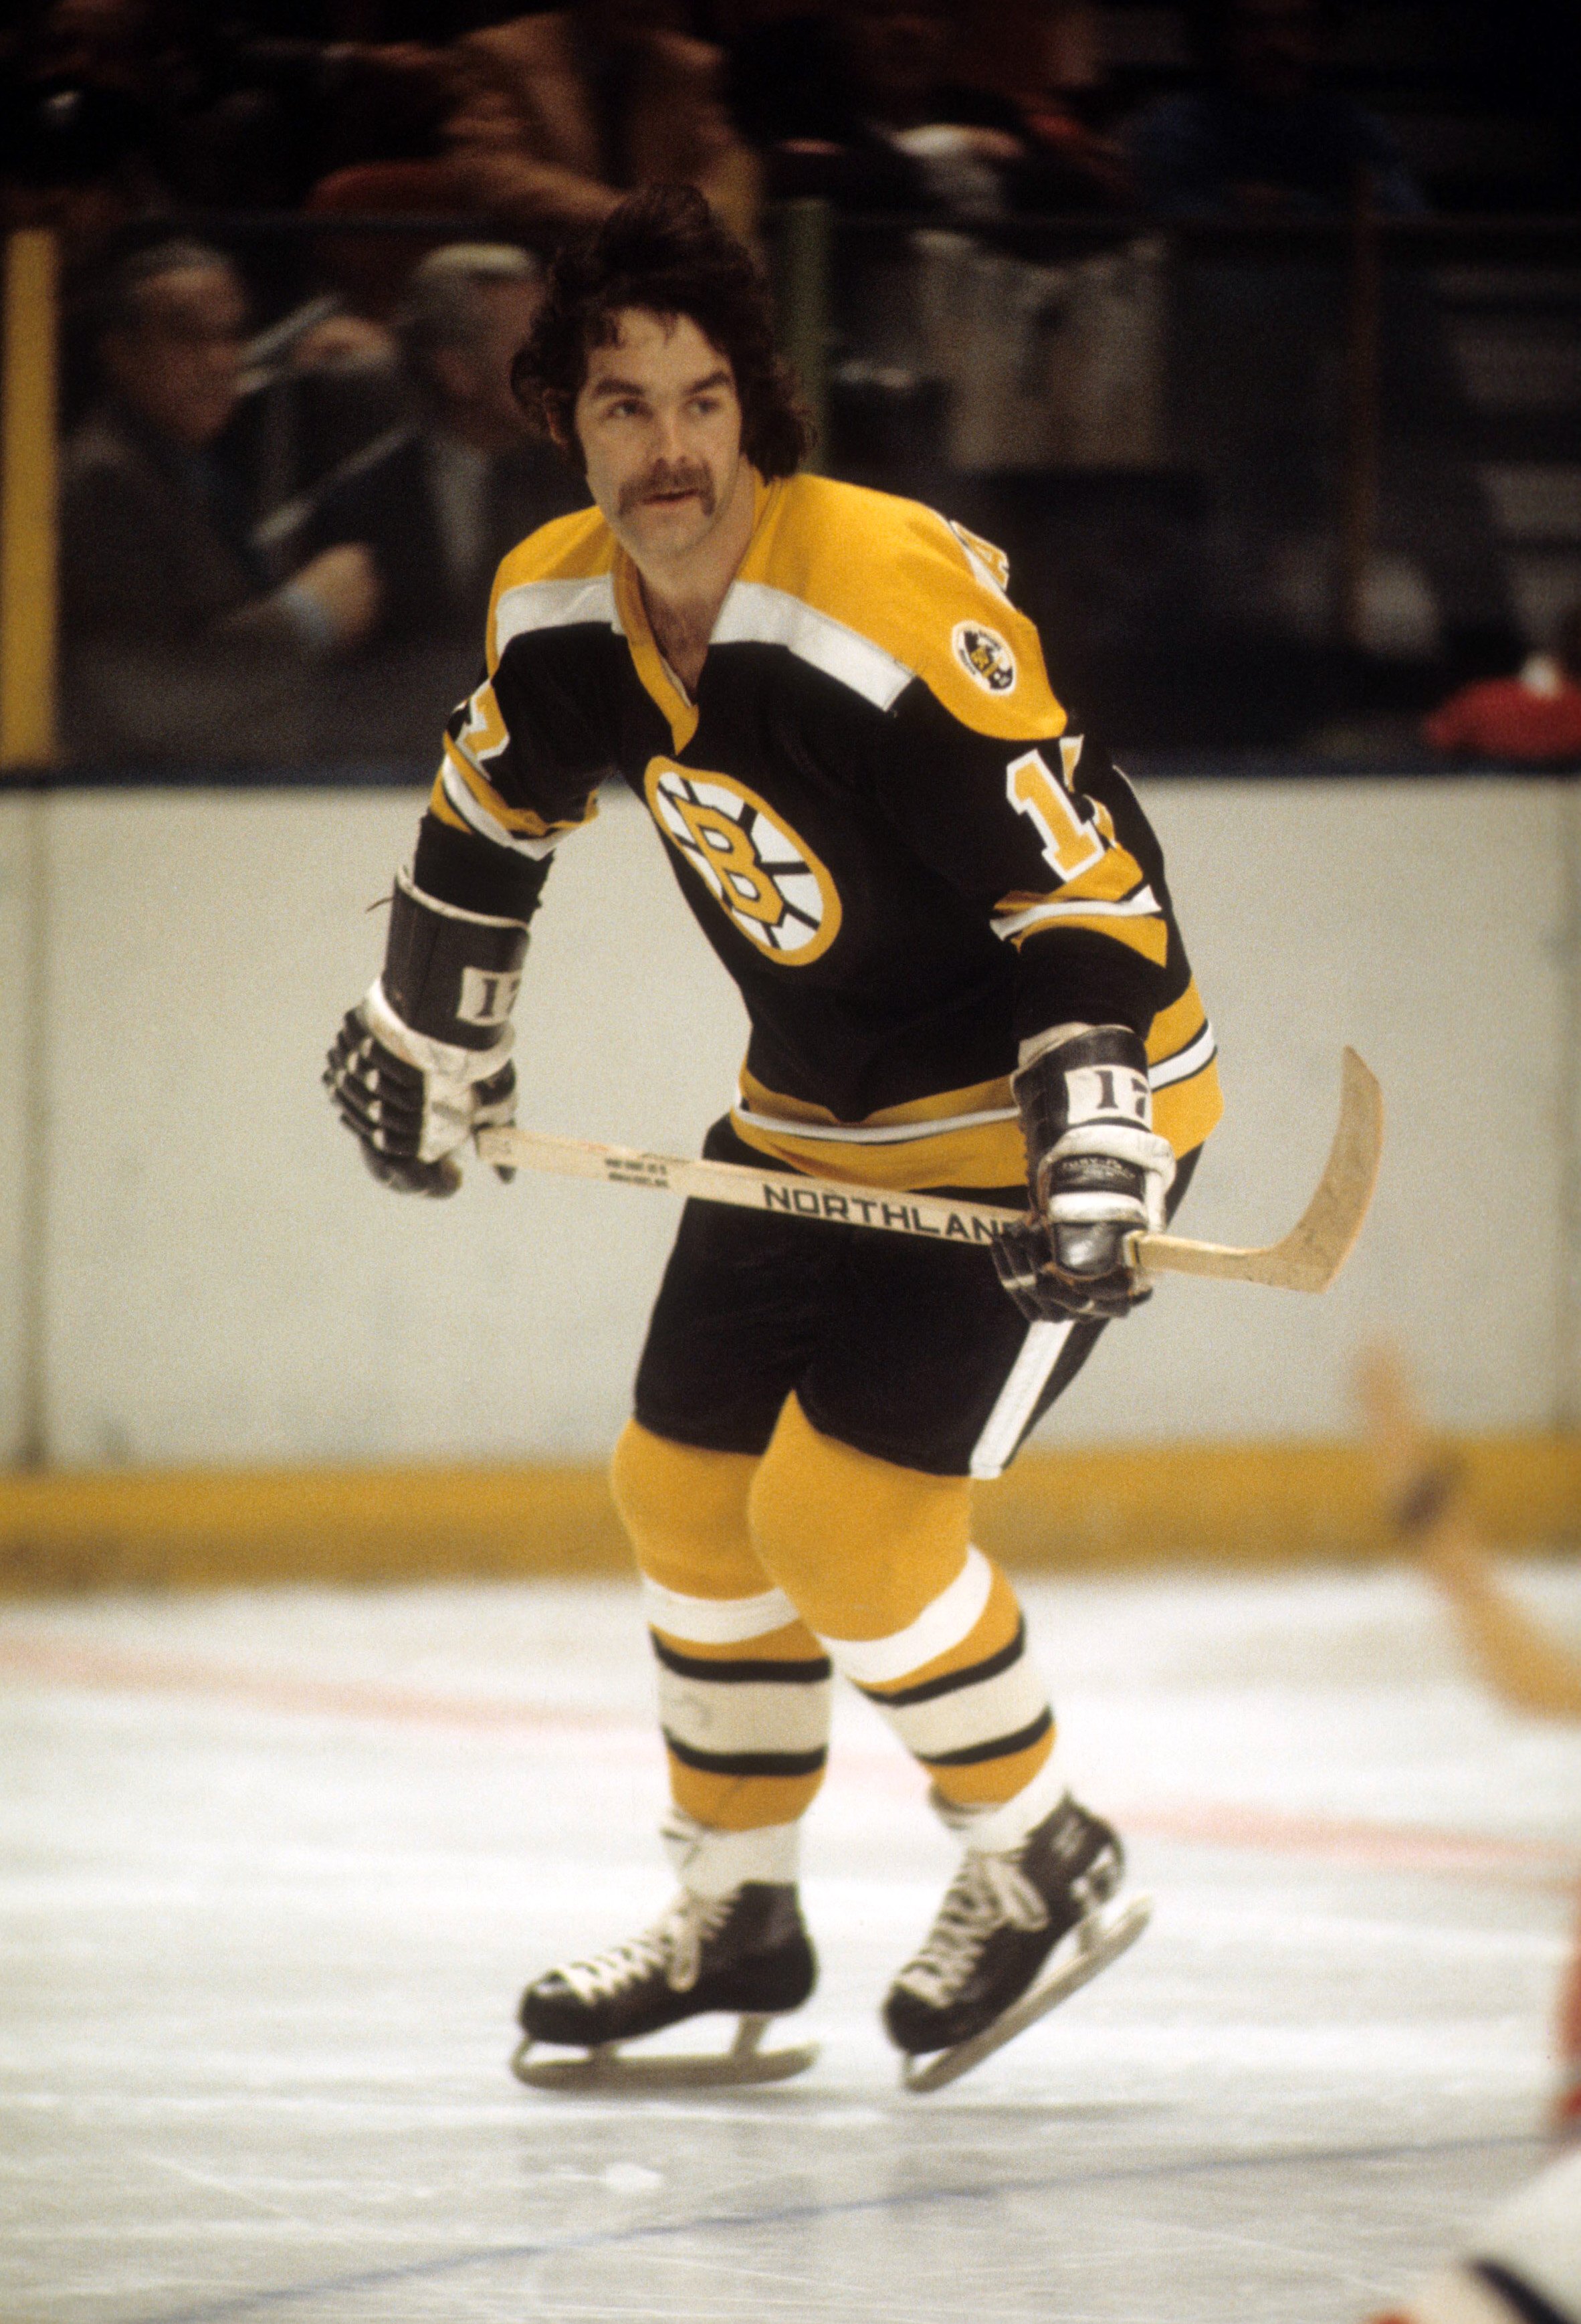 NEW YORK, NY - 1971: Derek Sanderson #17 of the Boston Bruins skates on the ice during an NHL game against the New York Rangers circa 1971 at the Madison Square Garden in New York, New York. 